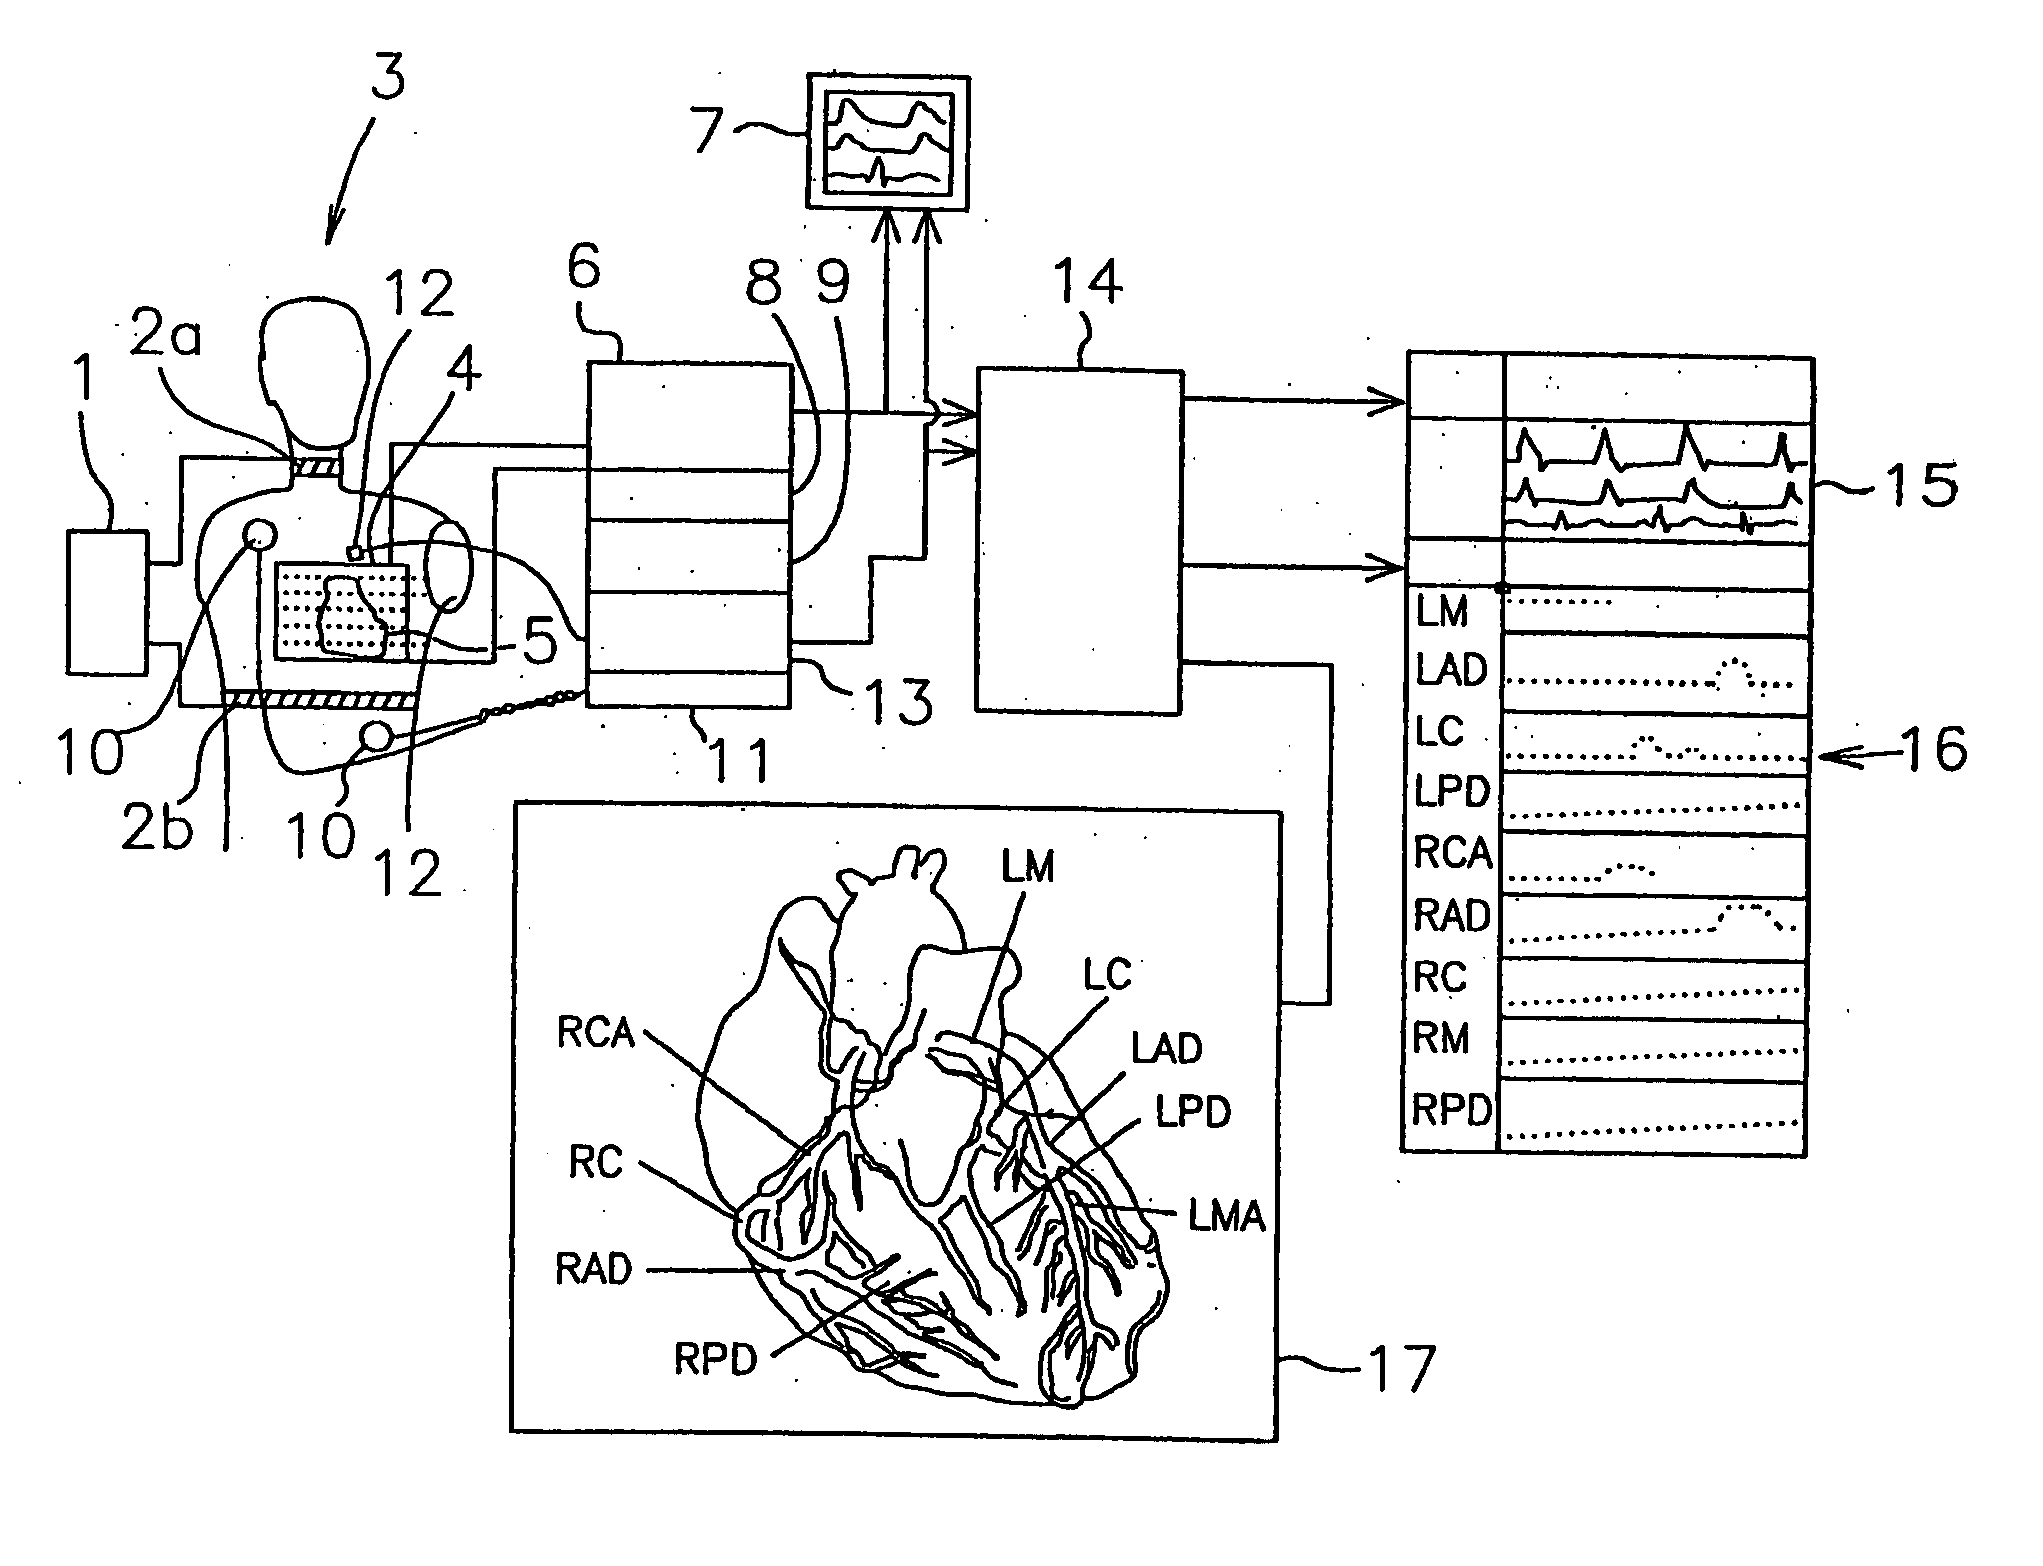 Stenosis detection device